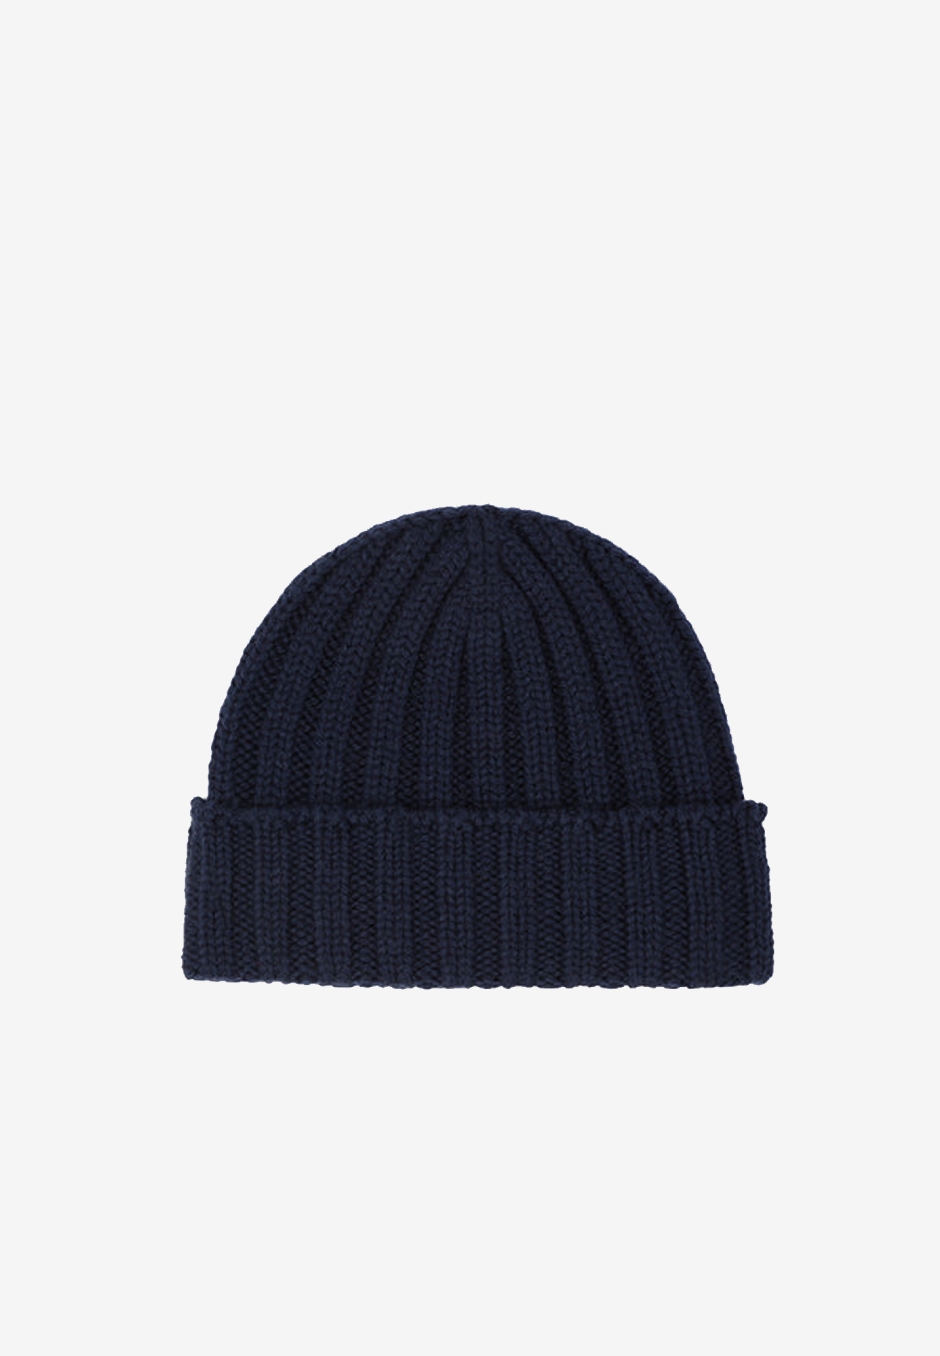 Another Aspect Beanie 1.0 Navy